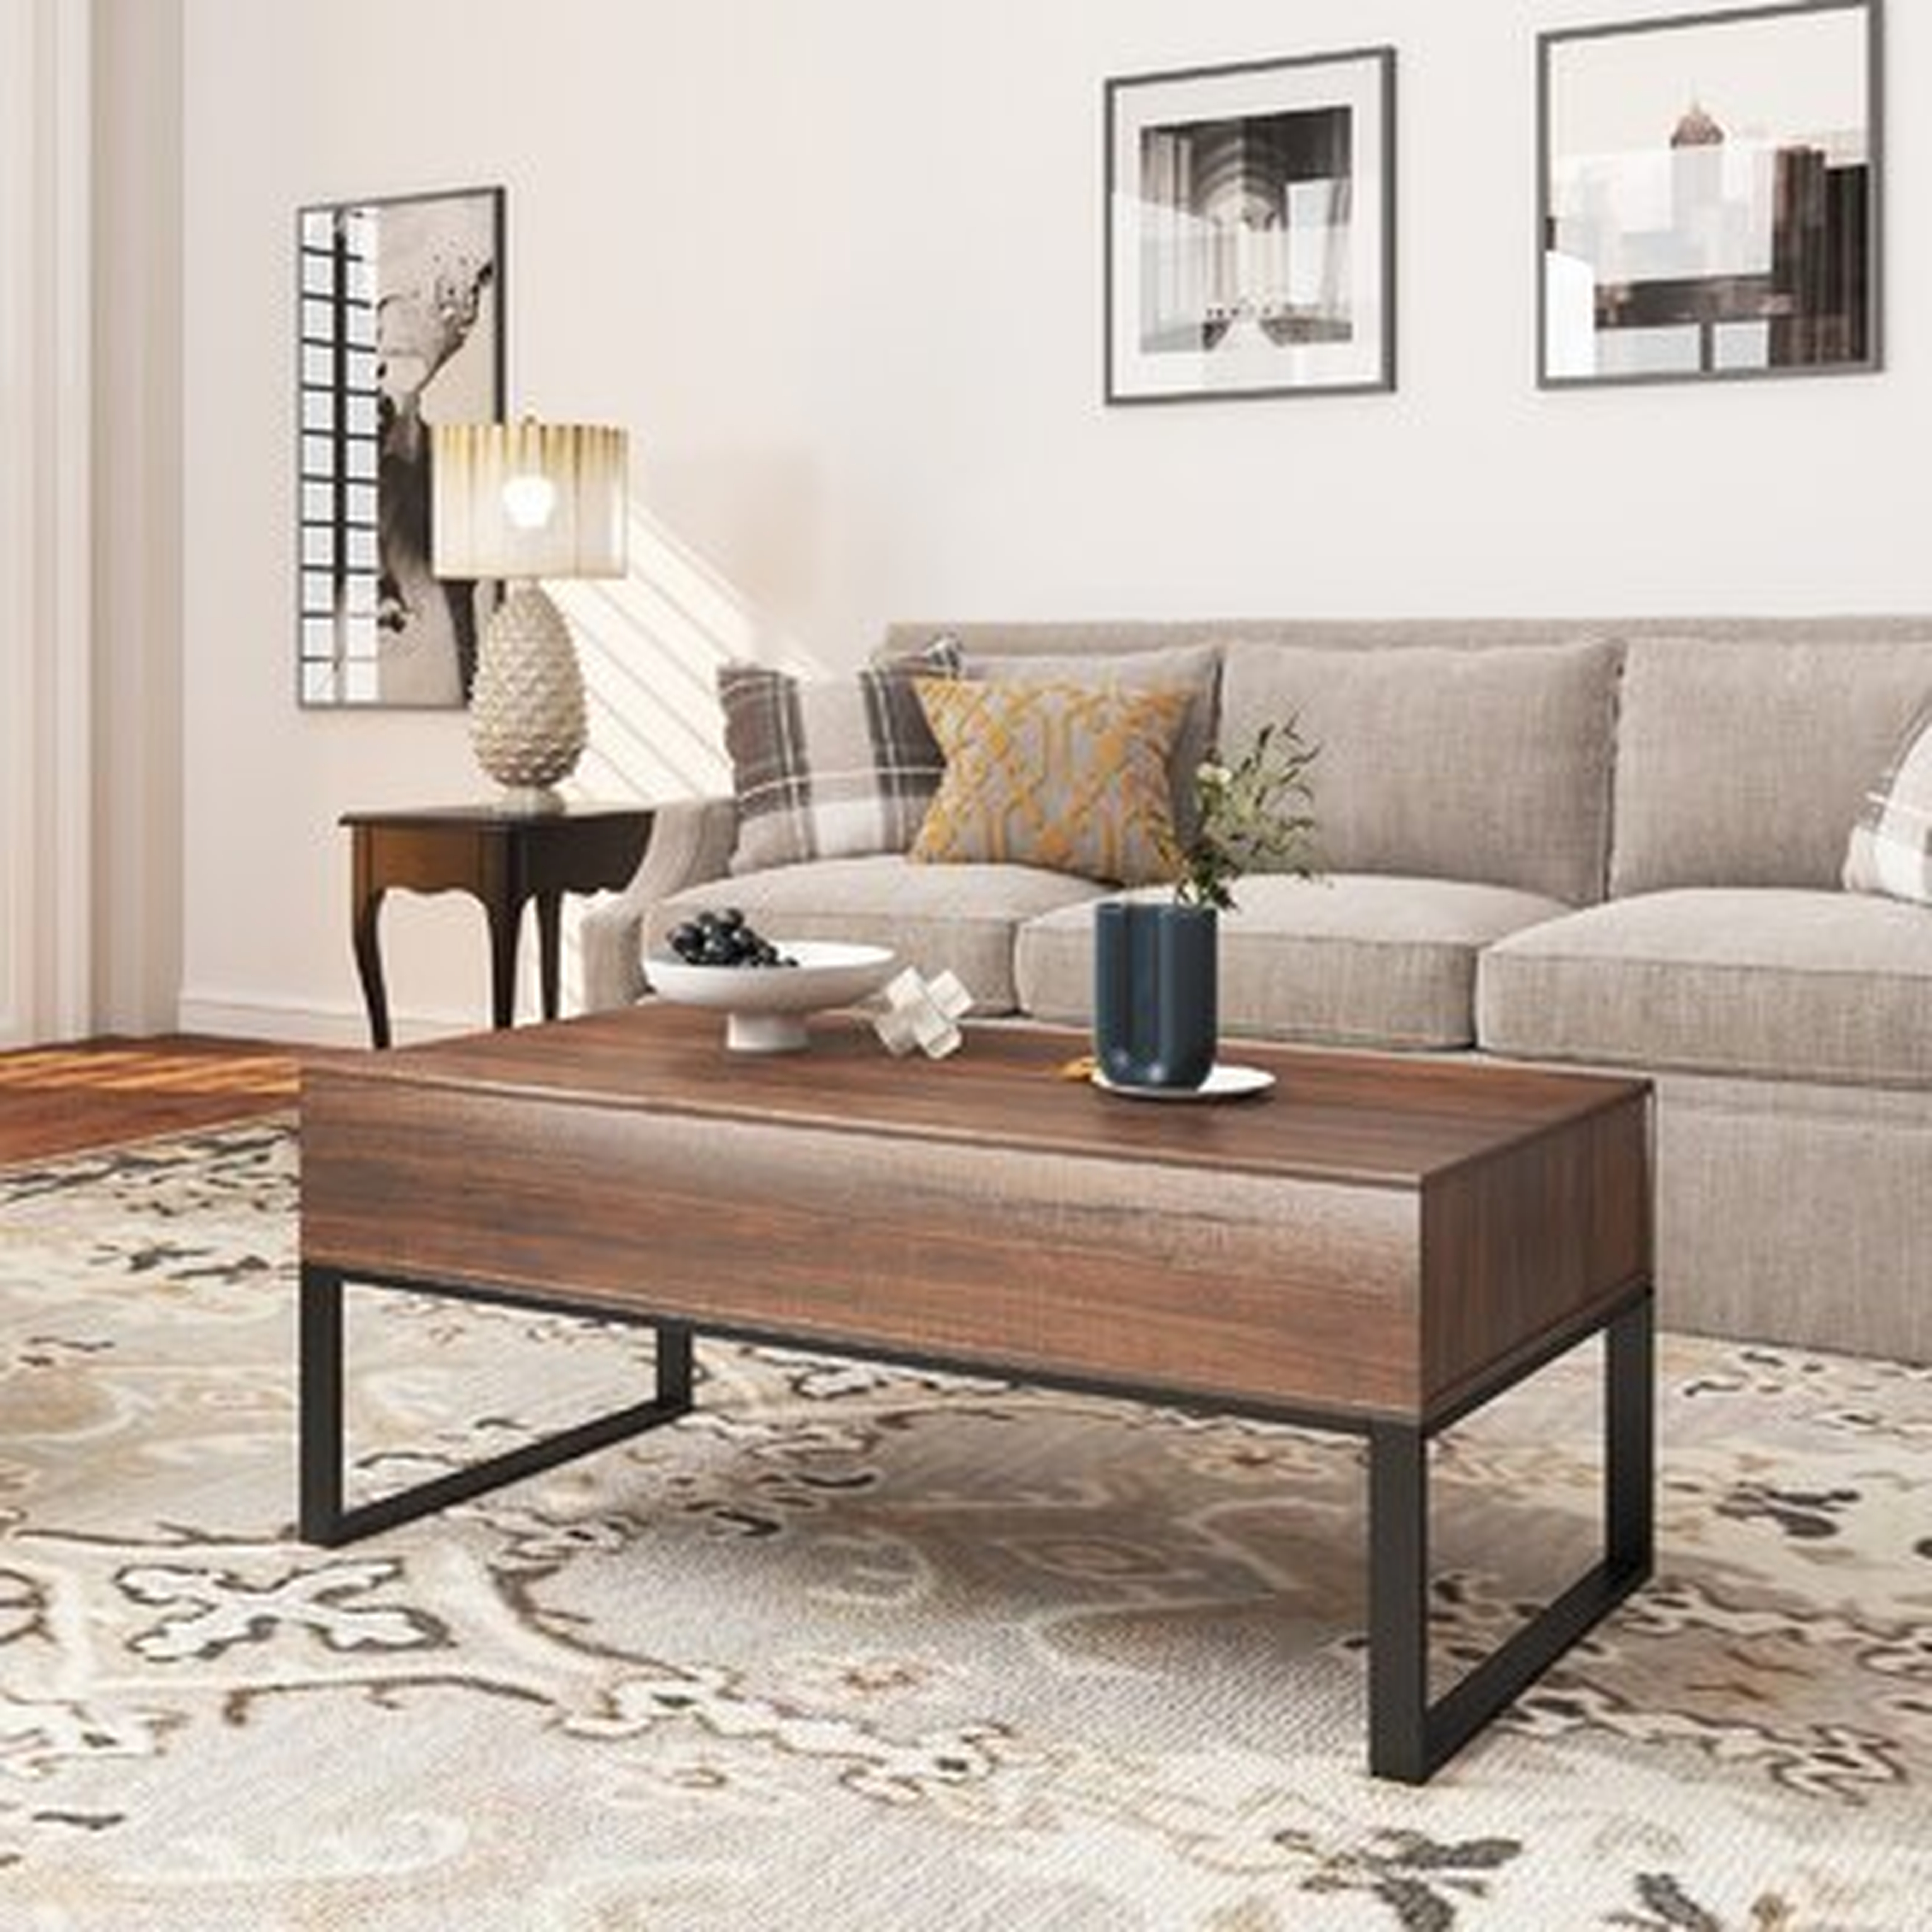 Monnier Lift Top Extendable Frame Coffee Table with Storage - Wayfair